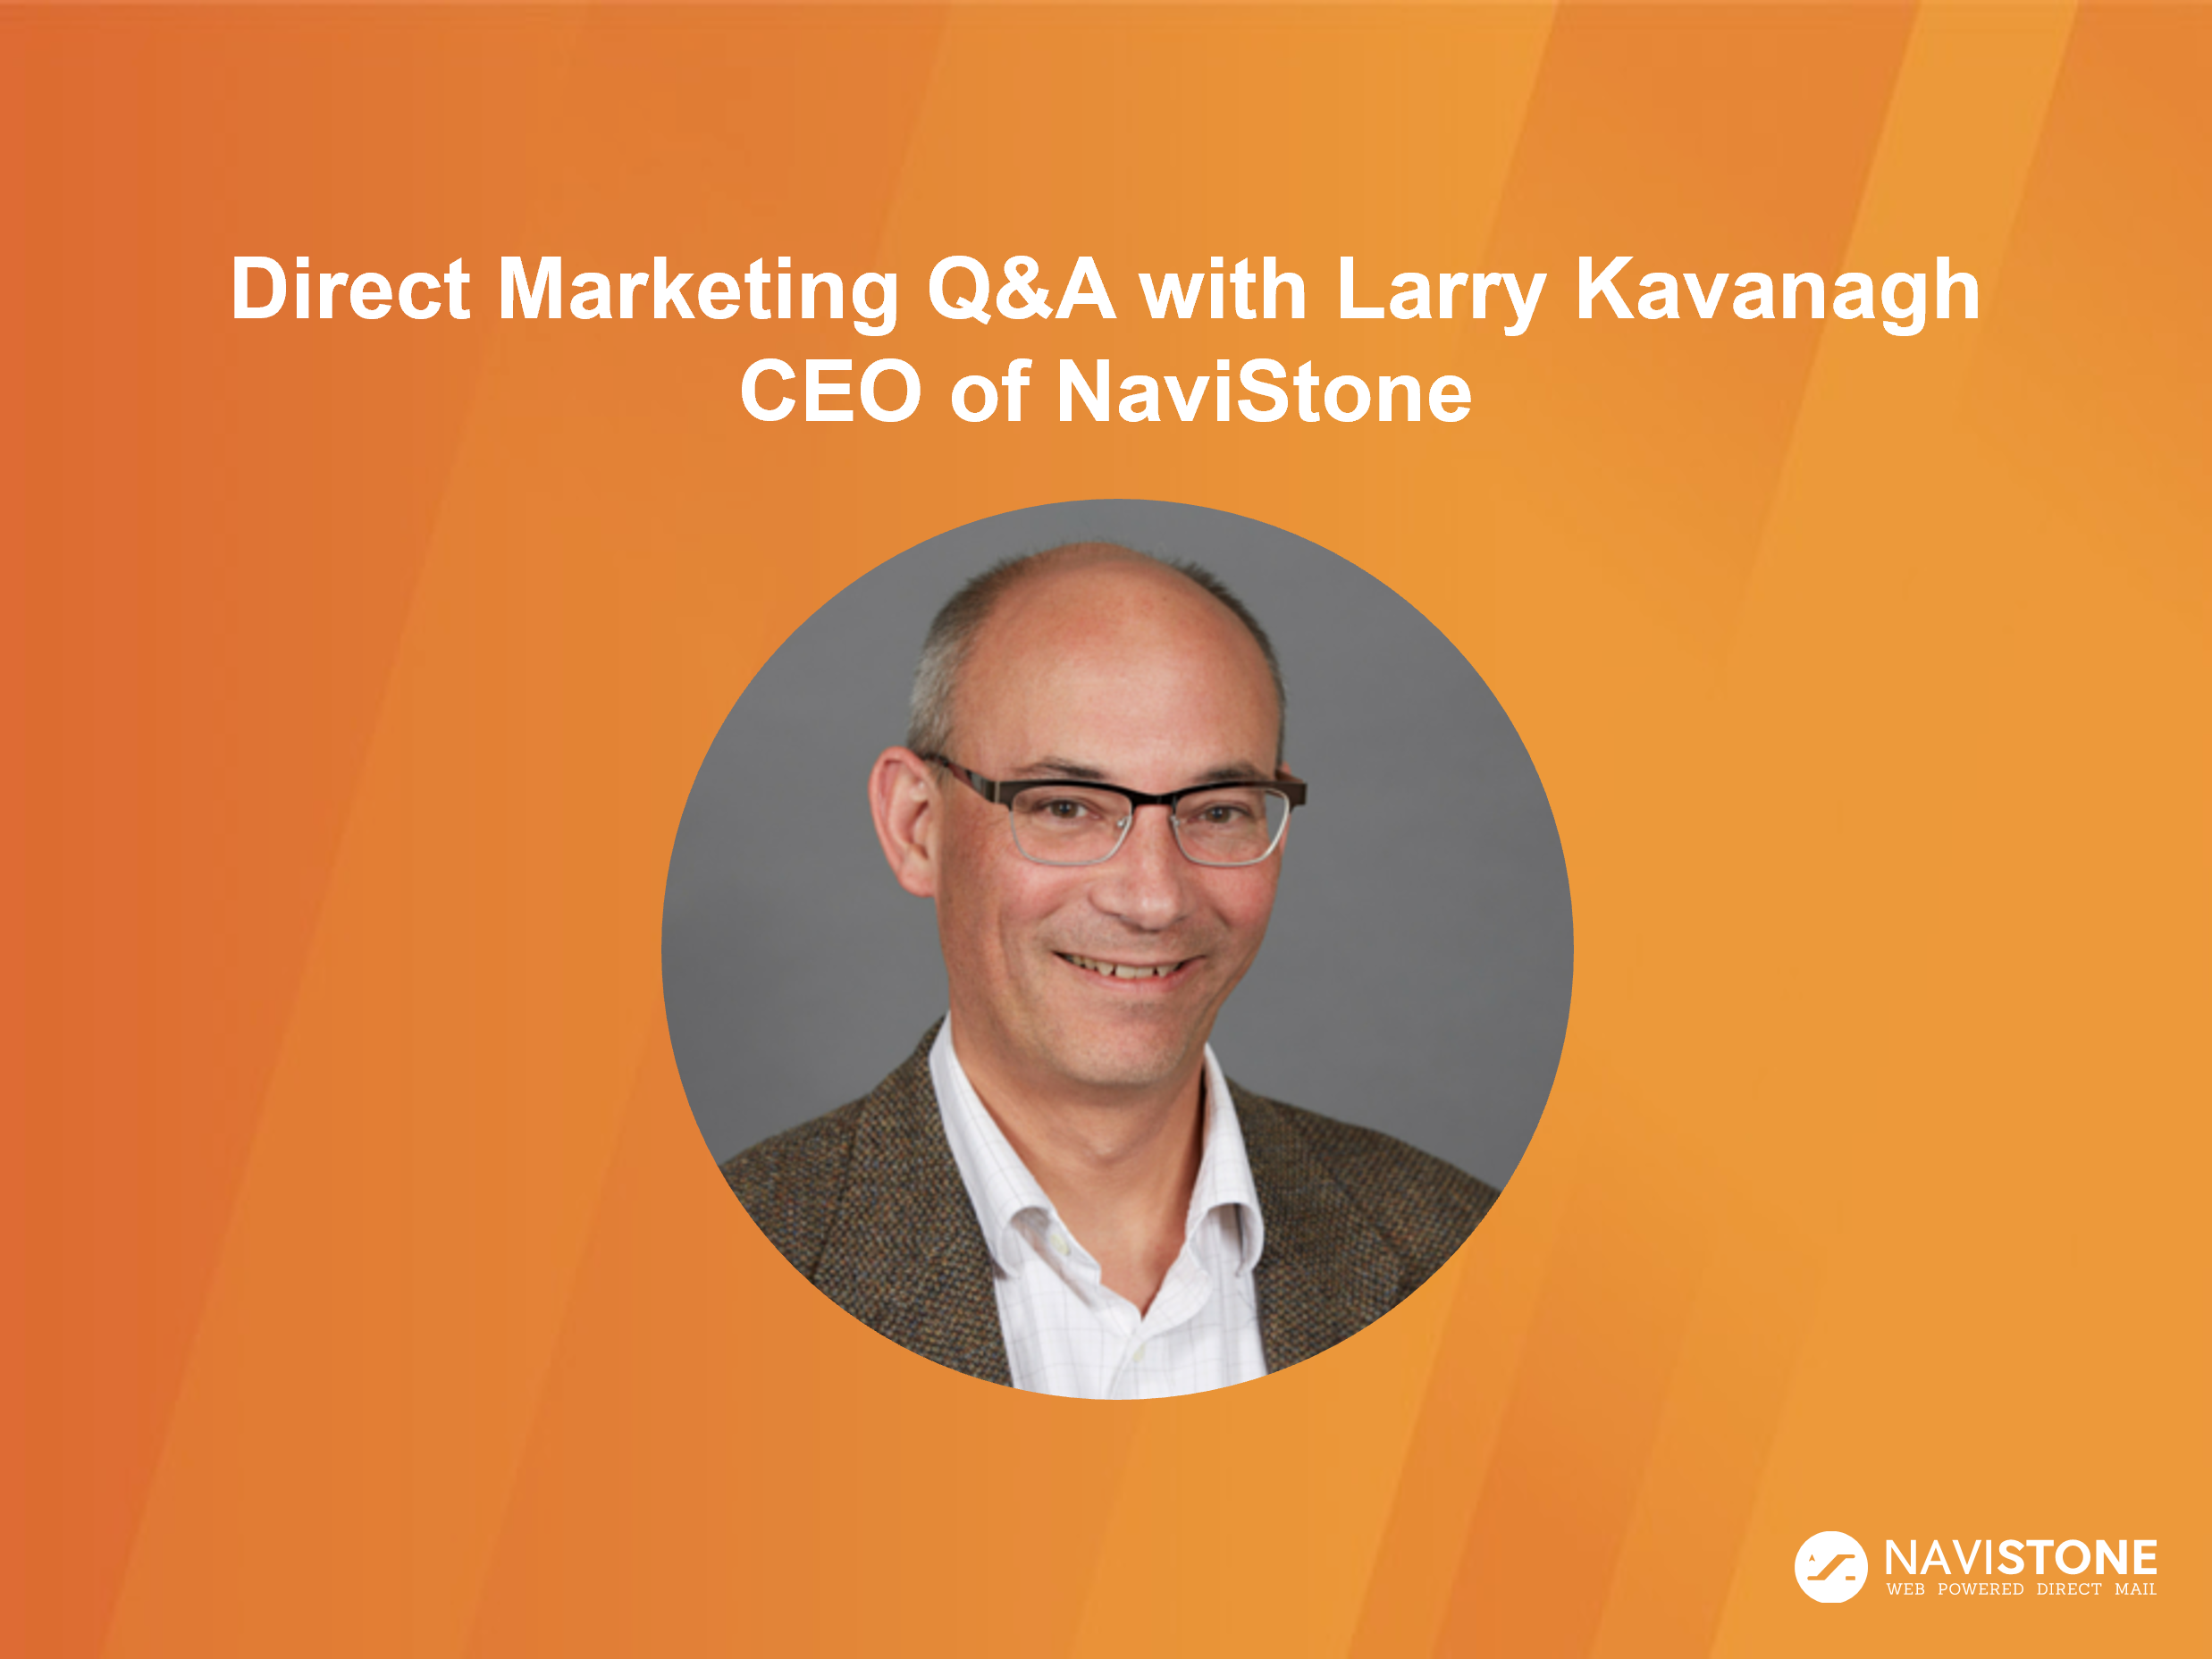 Direct Marketing Q&A with Larry Kavanagh, CEO of NaviStone